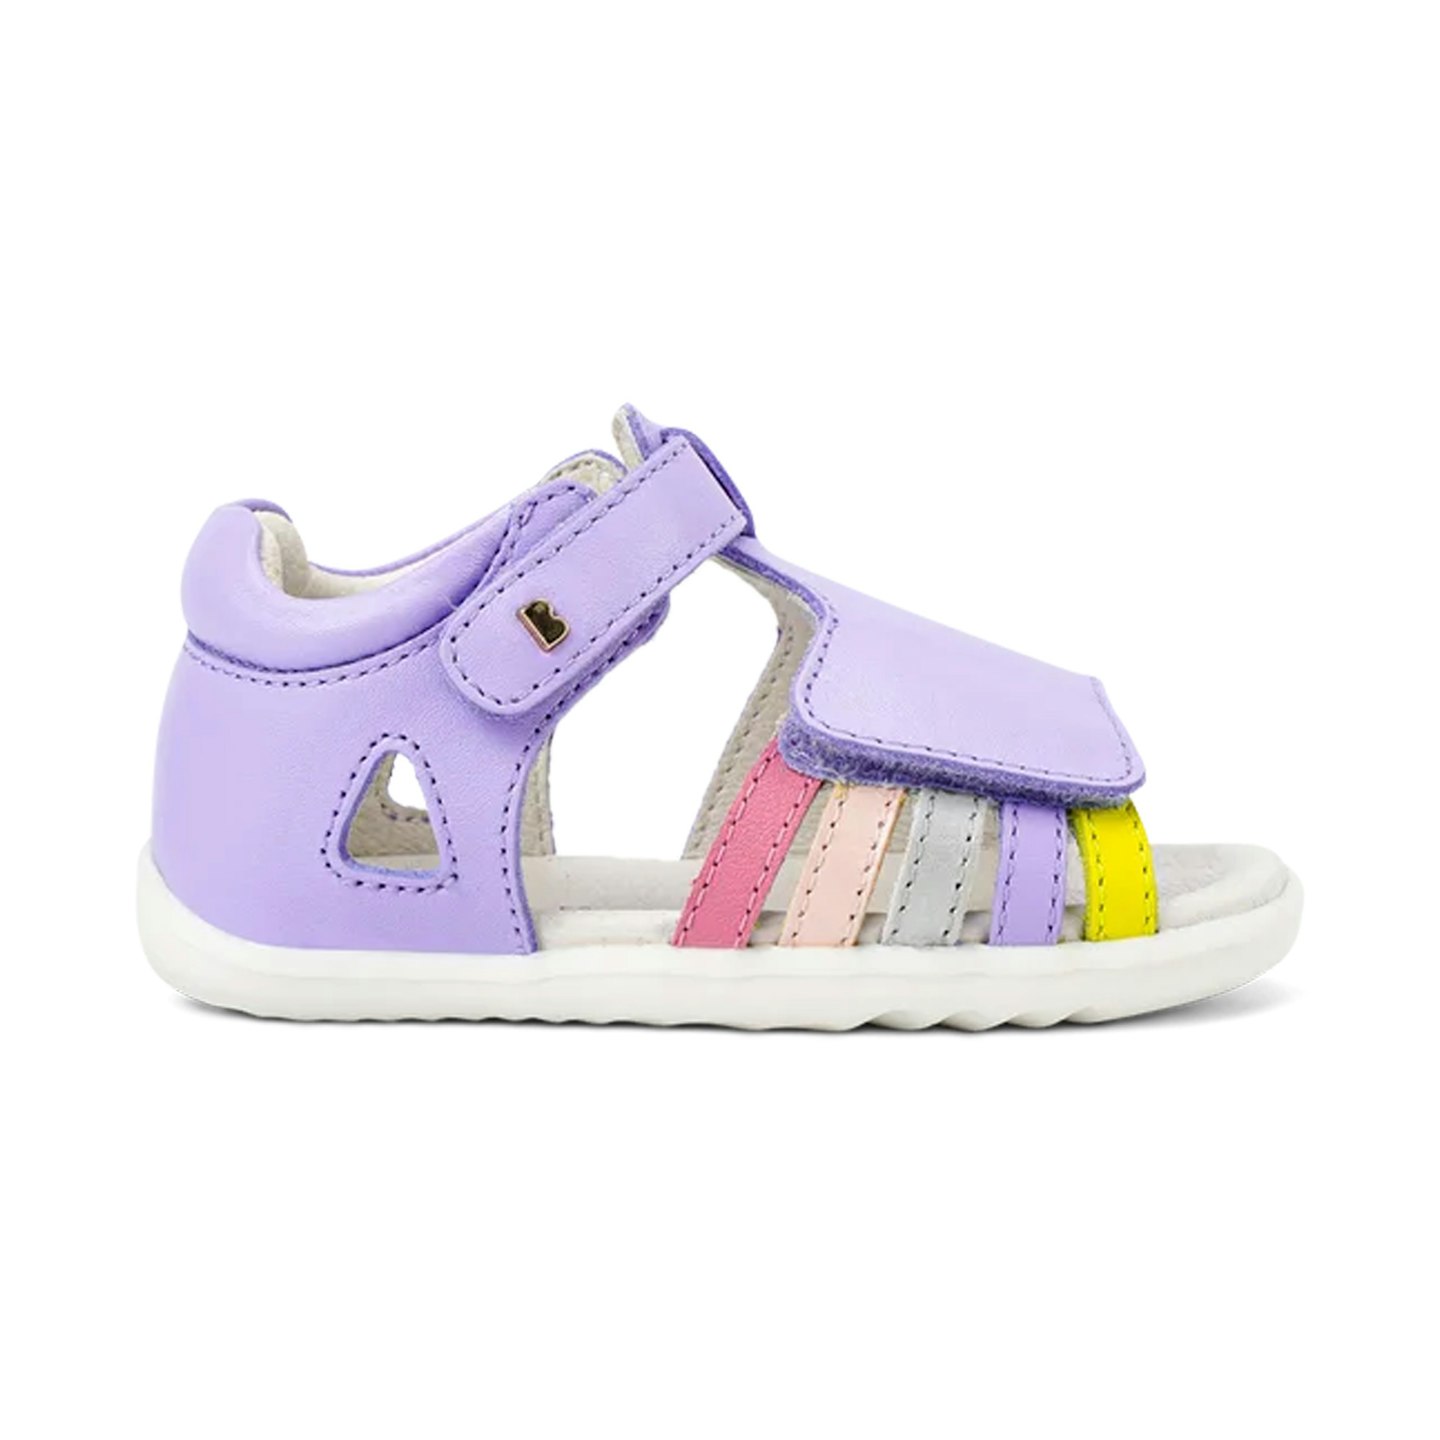 Bobux Mirror baby's first shoes